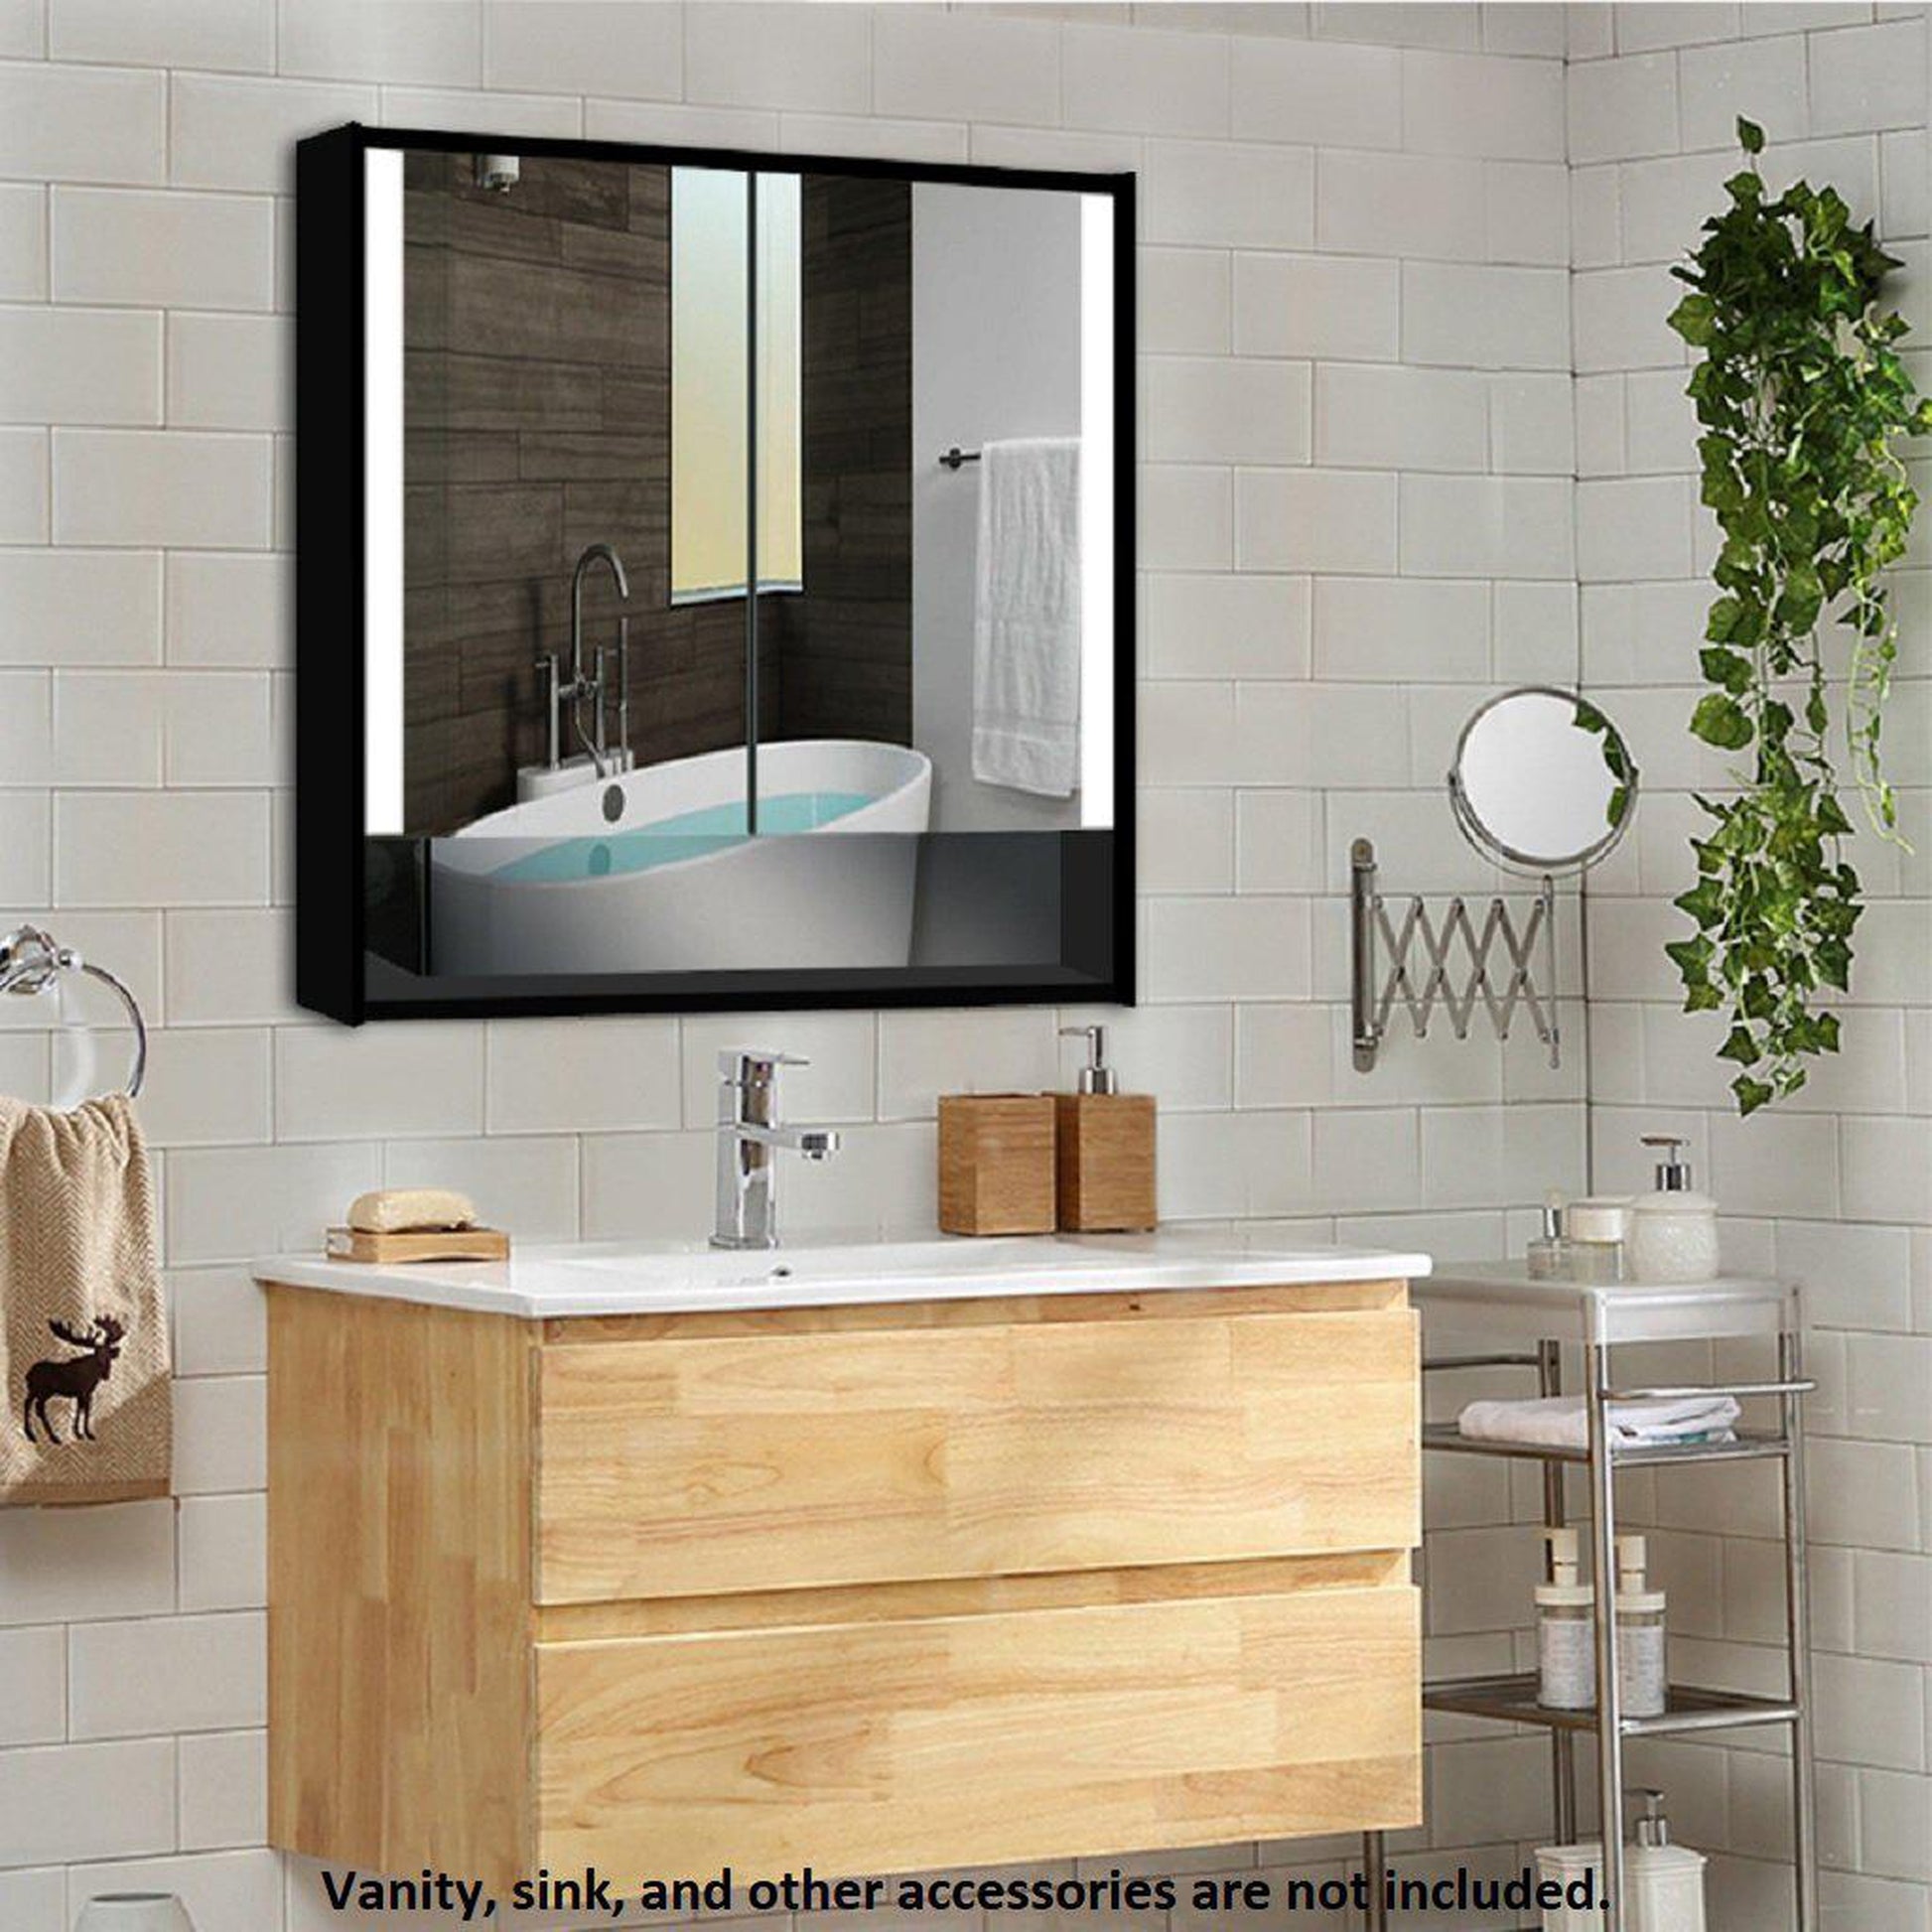 Lighted Impressions Edgar 32" x 28" Rectangular Framed Wall-Mounted LED Mirror Cabinet With 3-Section Rocker Switch & Glass Shelves